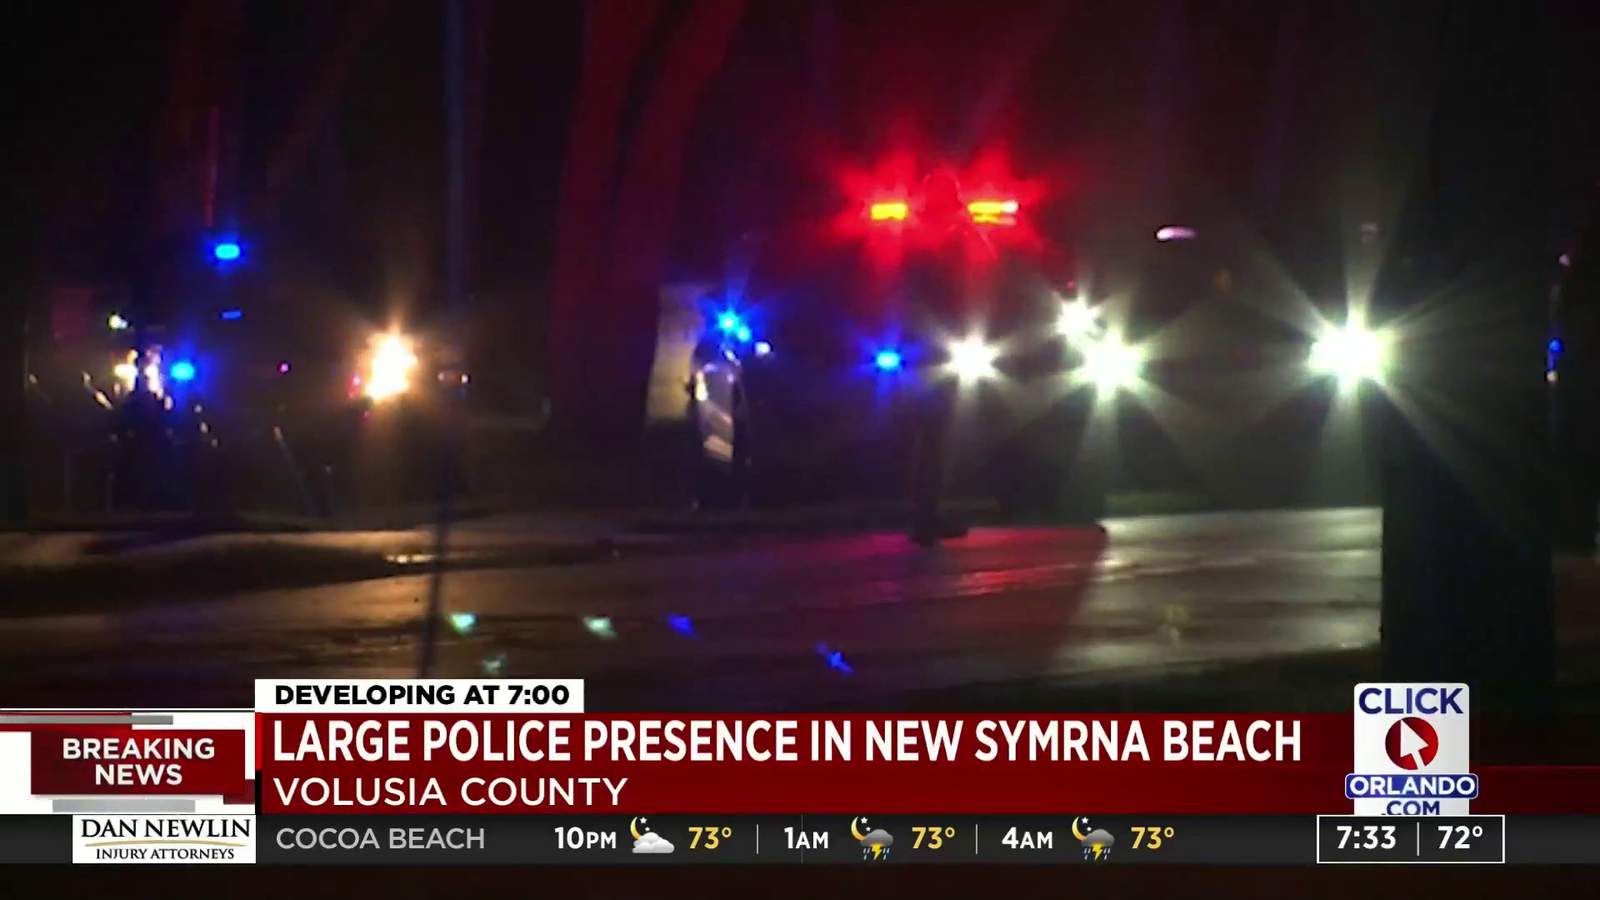 Man killed, officer wounded in New Smyrna Beach shooting, deputies say